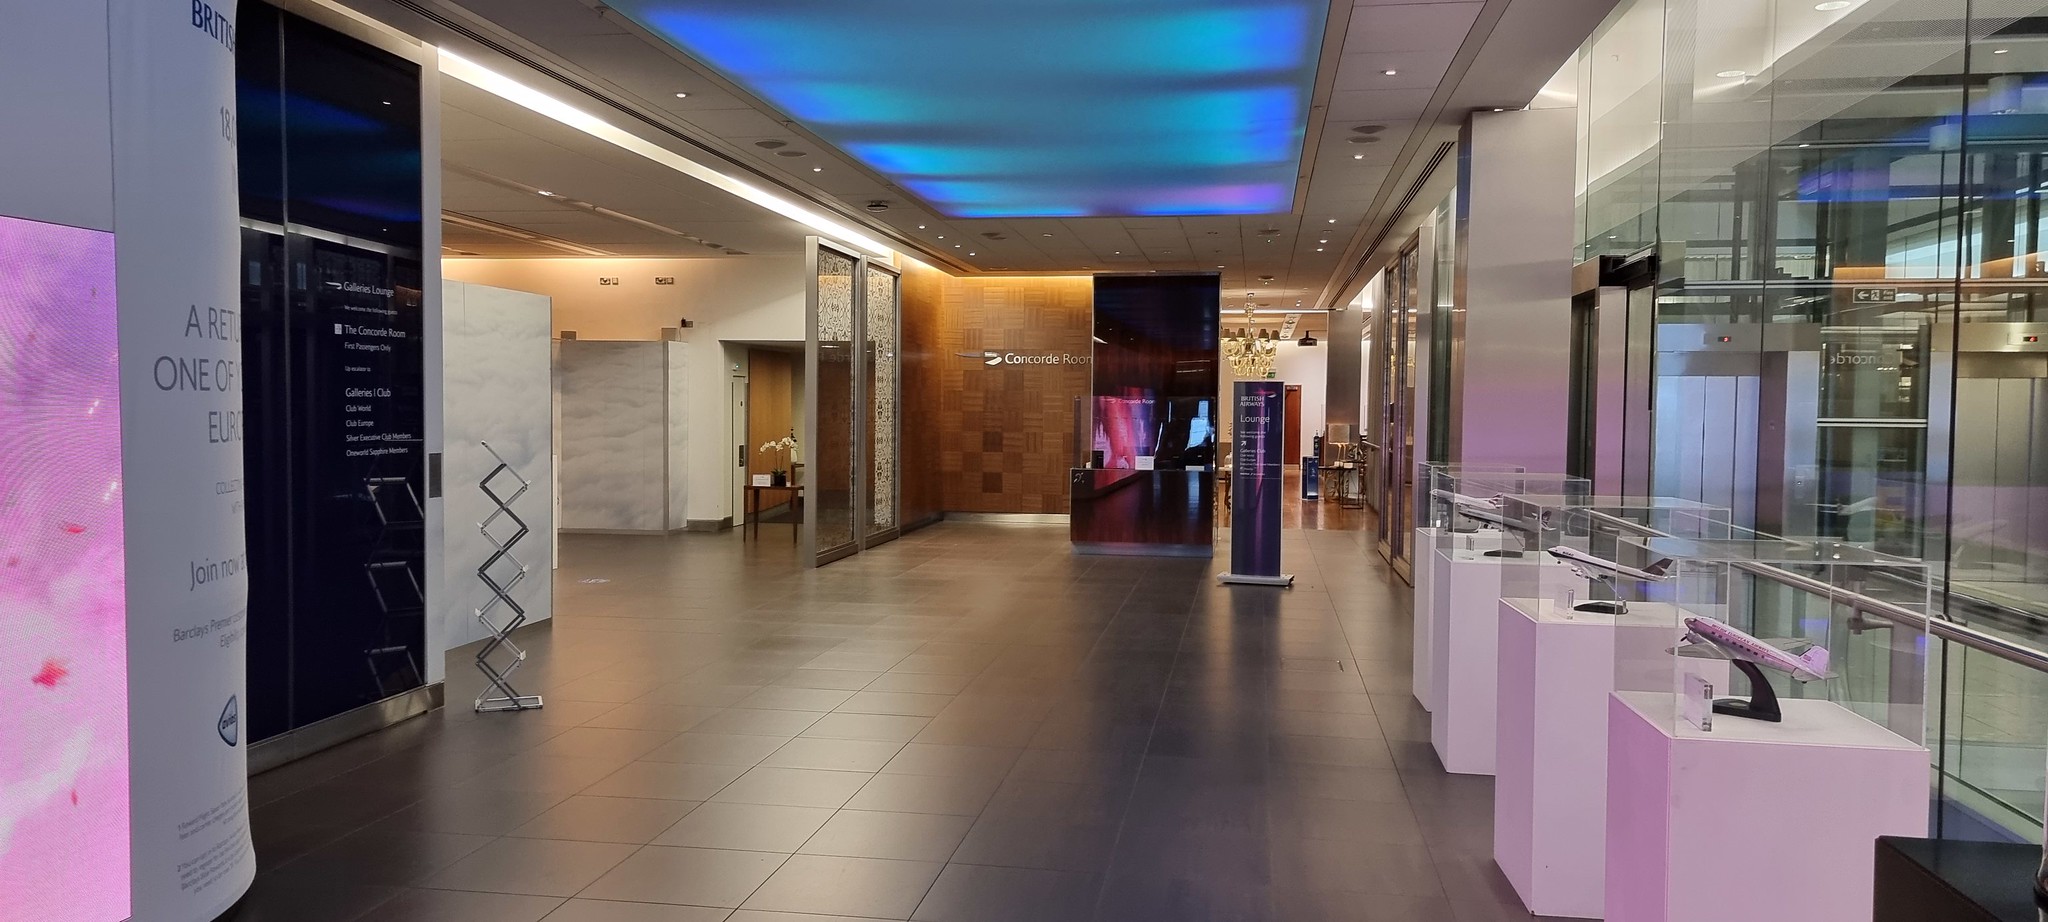 Access to the CCR in the Heathrow T5 South Lounges complex